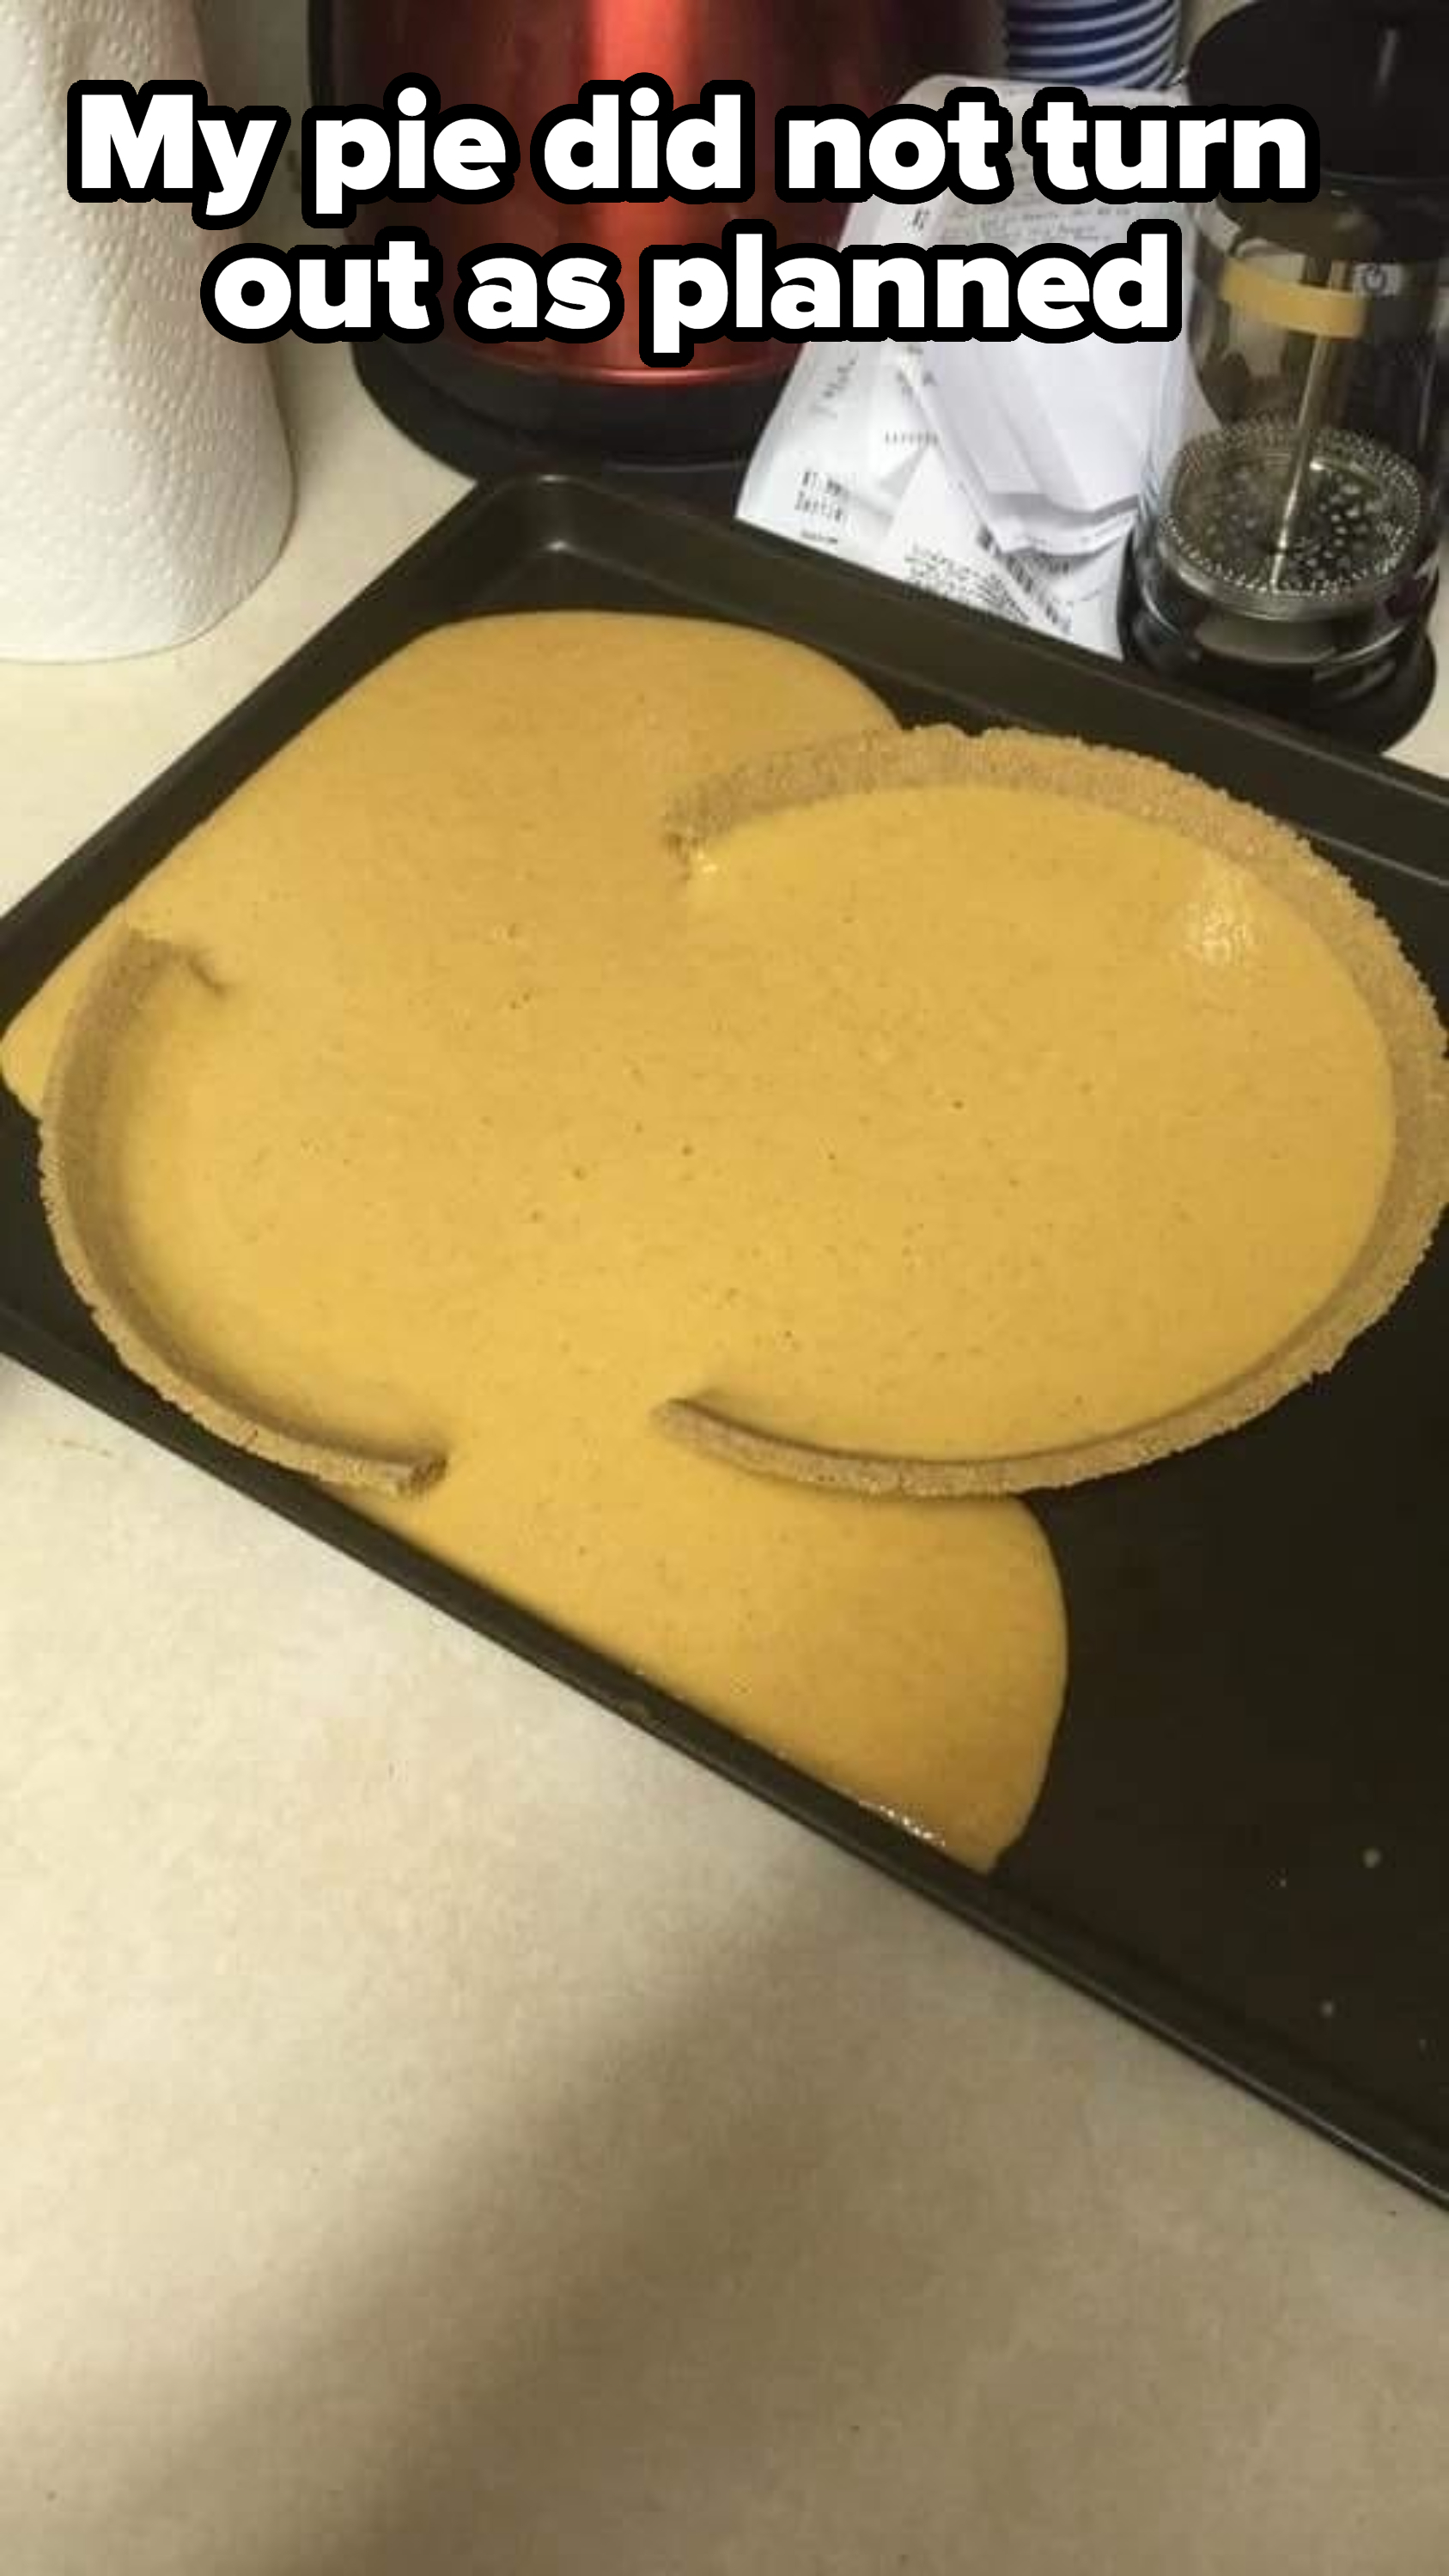 &quot;My pie did not turn out as planned&quot;